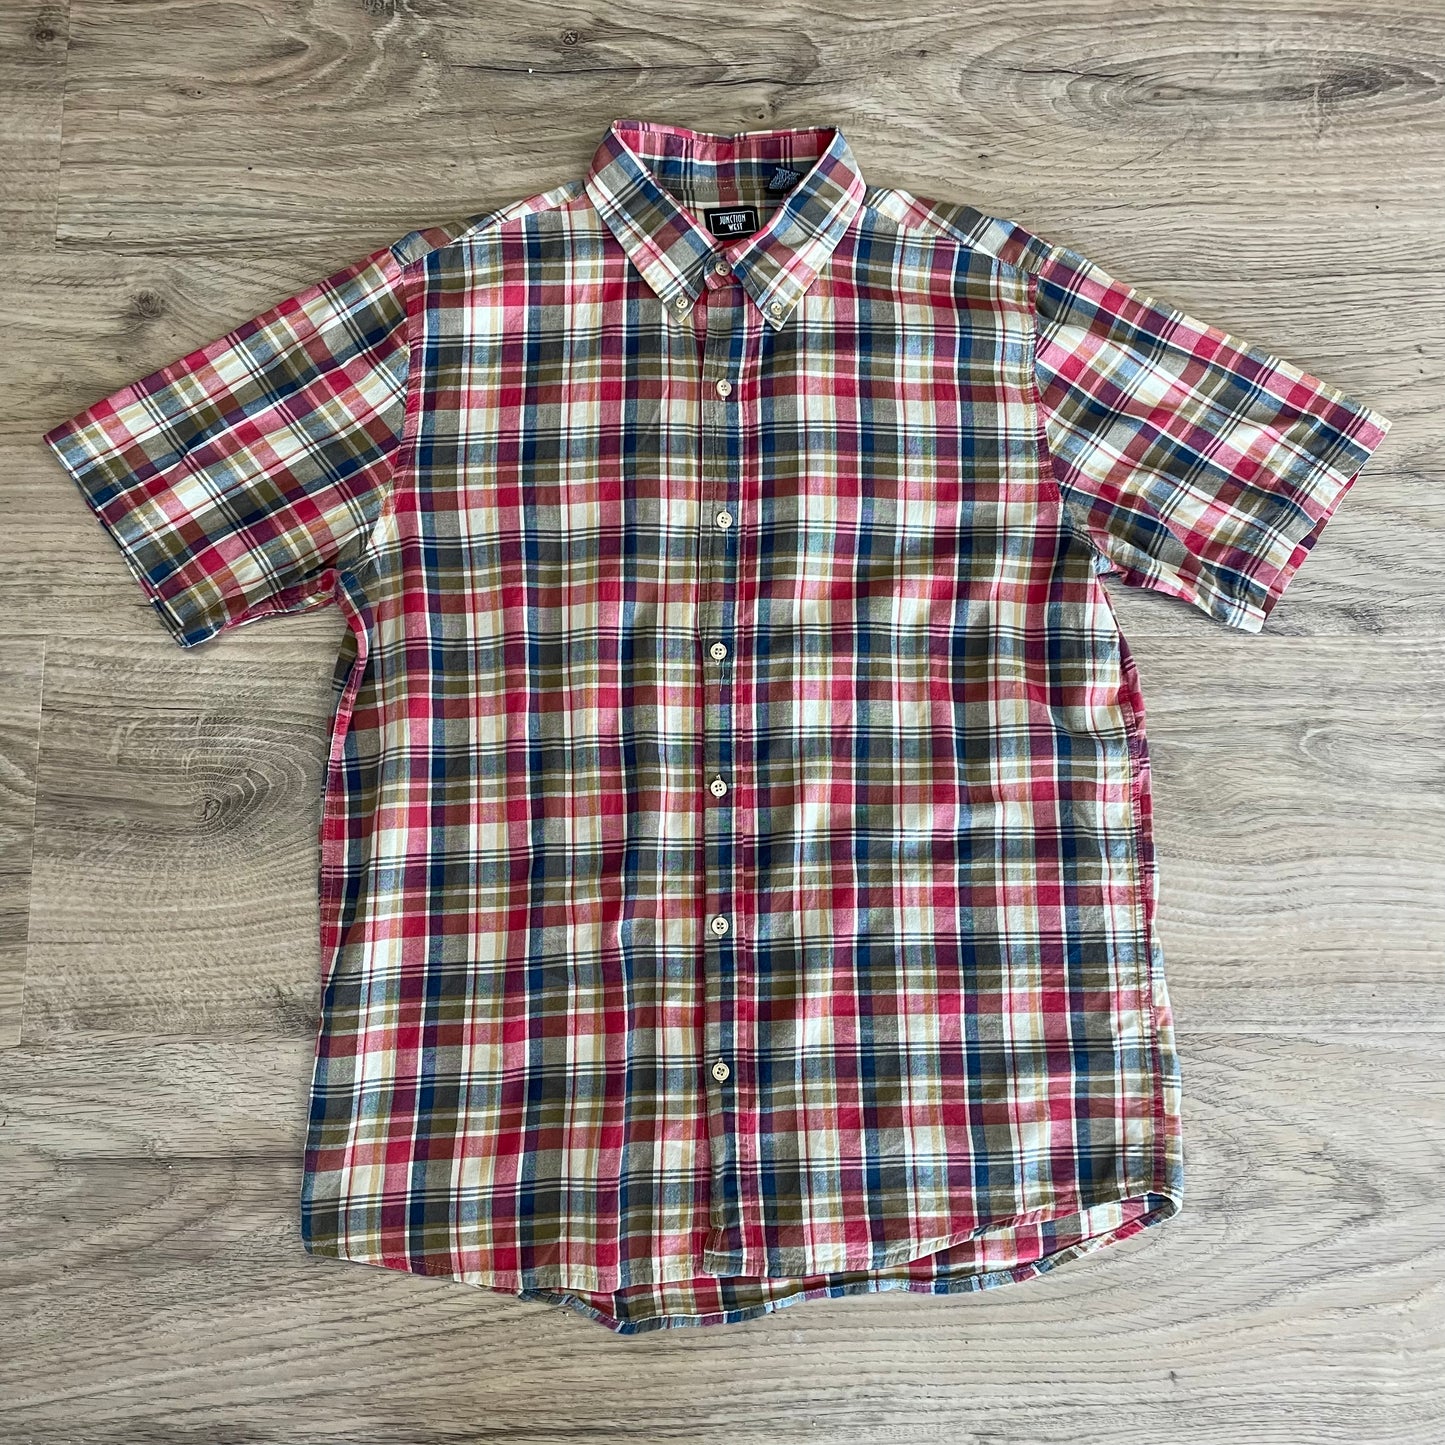 Checked western style shirt